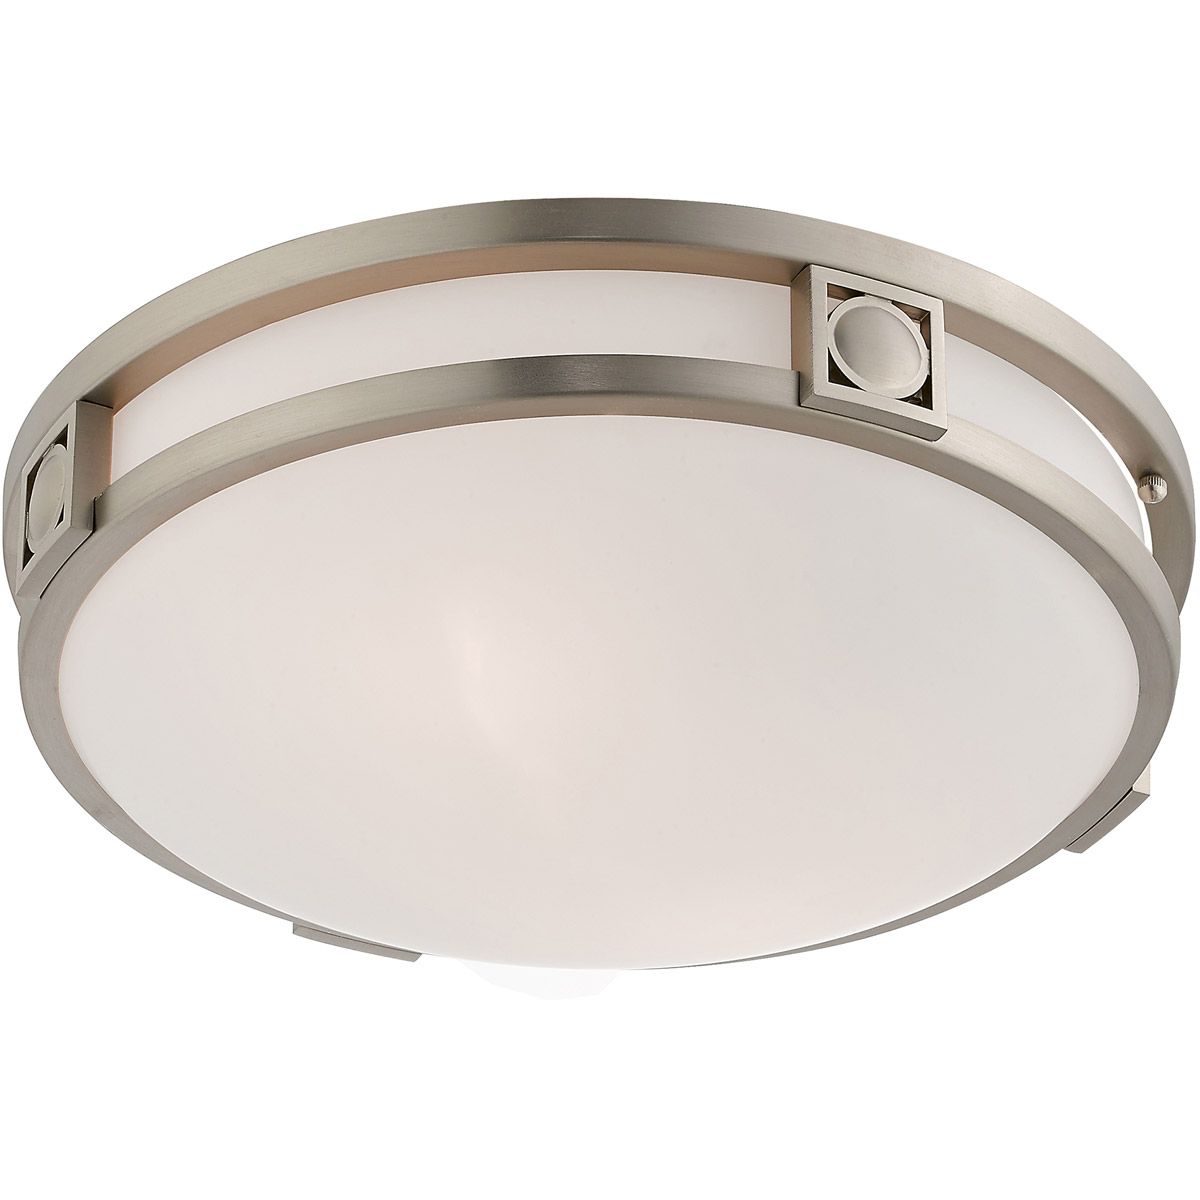 Livex 4487 91 Matrix 2 Light 13 Inch Brushed Nickel Ceiling Mount With Regard To Ceiling Hung Polished Nickel Oval Mirrors (View 12 of 15)